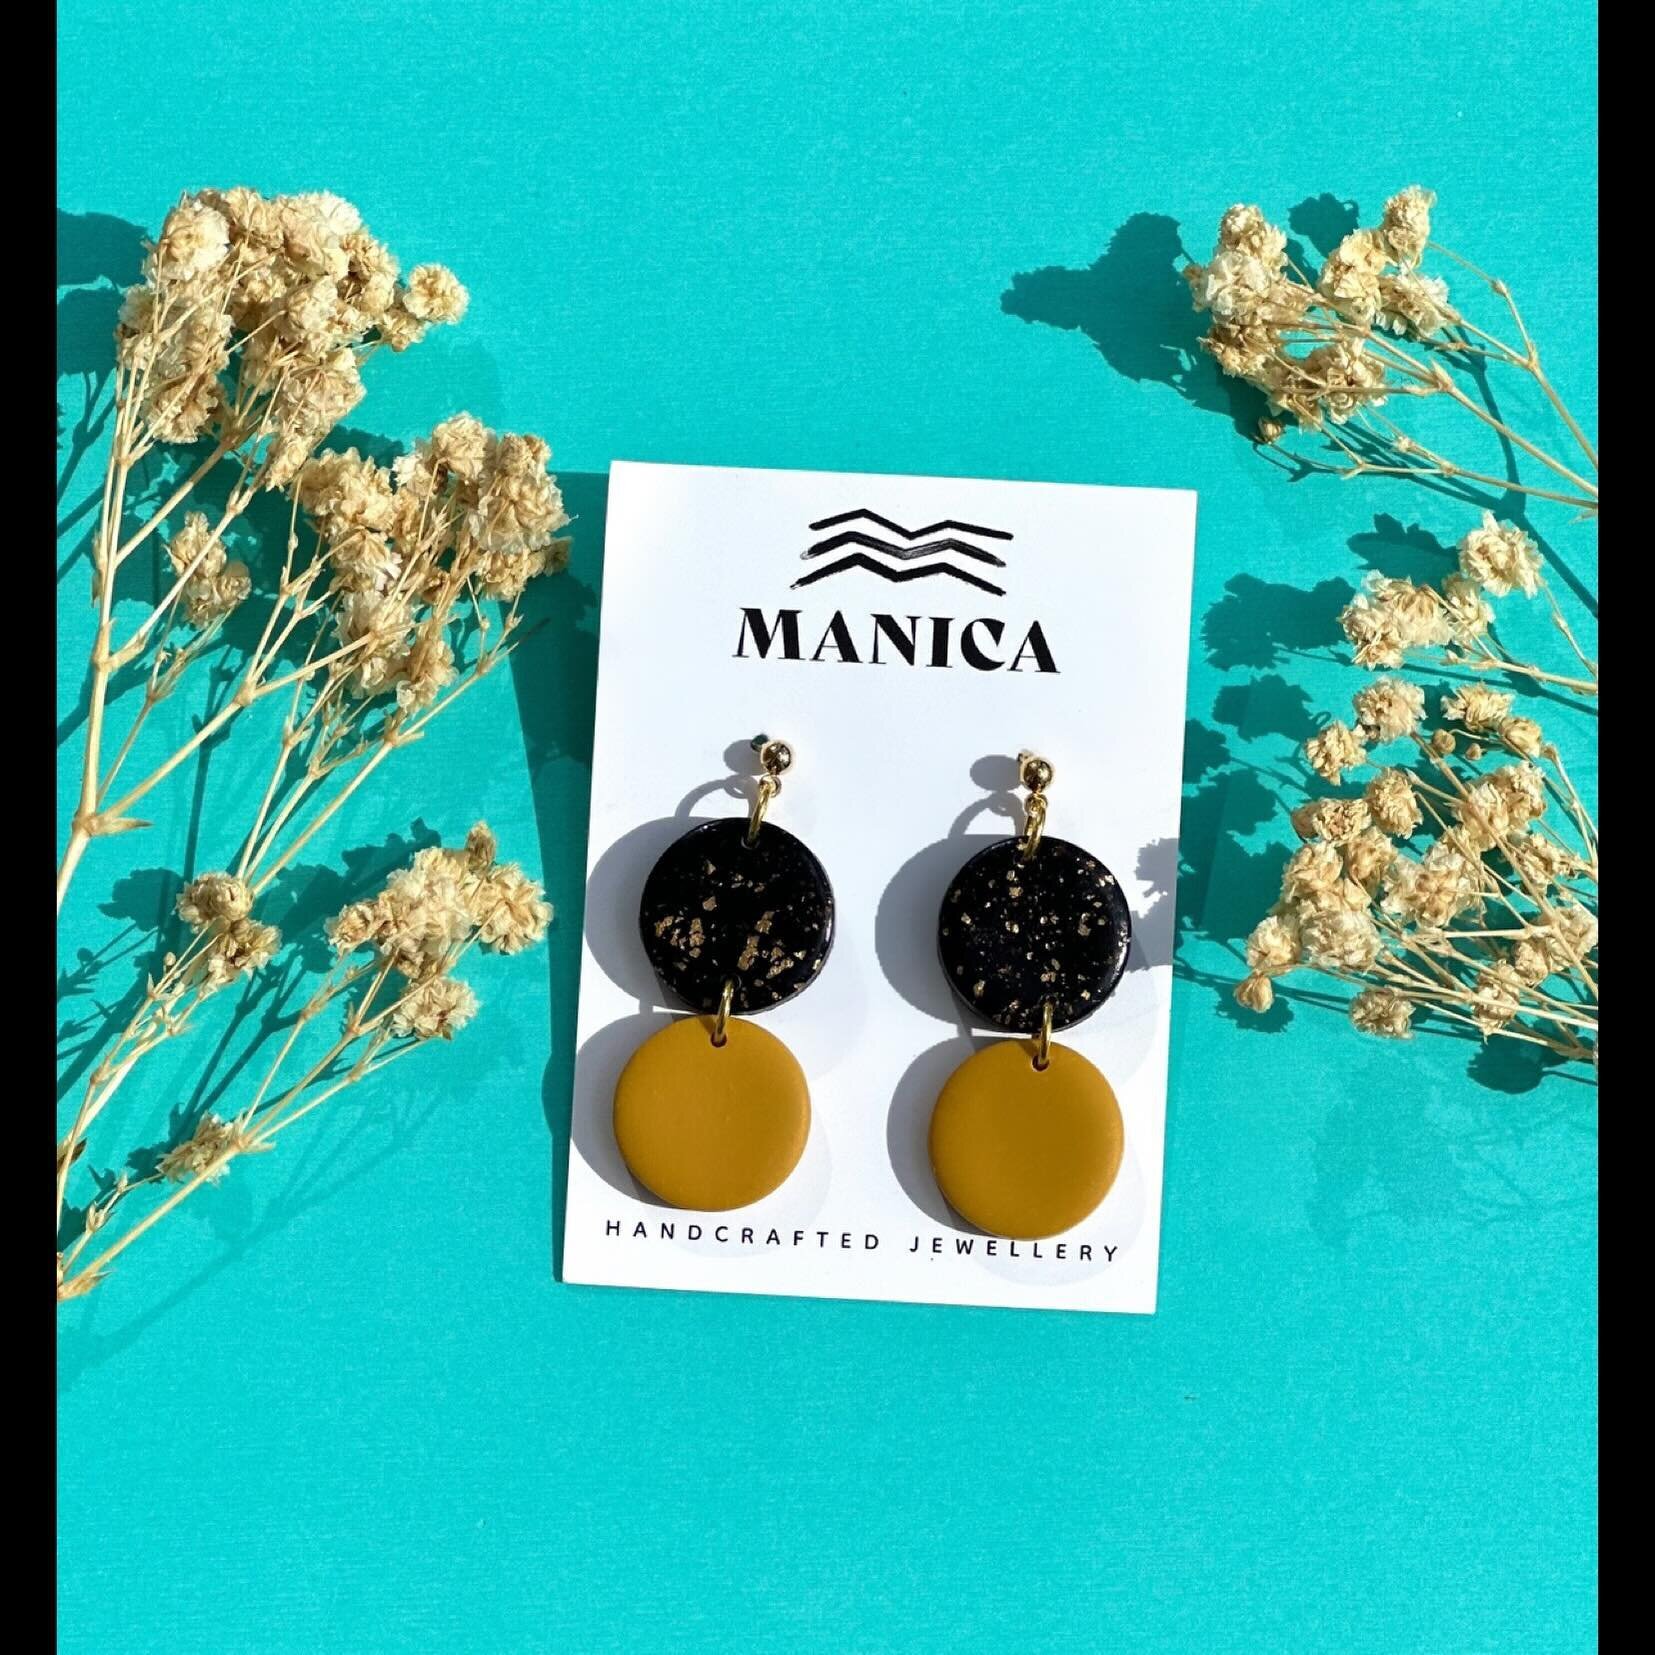 Say hello to Aurum, one of our versatile favourites and best sellers. These come in mustard and terrocotta 🧡💛
⠀
⠀
See you at @blackculturemarket 
⠀
⠀
⠀
⠀
⠀
⠀
⠀
⠀
⠀
⠀
⠀
⠀
⠀
⠀
⠀
⠀
⠀
⠀
⠀
⠀
⠀
⠀
⠀
#manicajewellery #africandesigner #blackdesigner #polyme